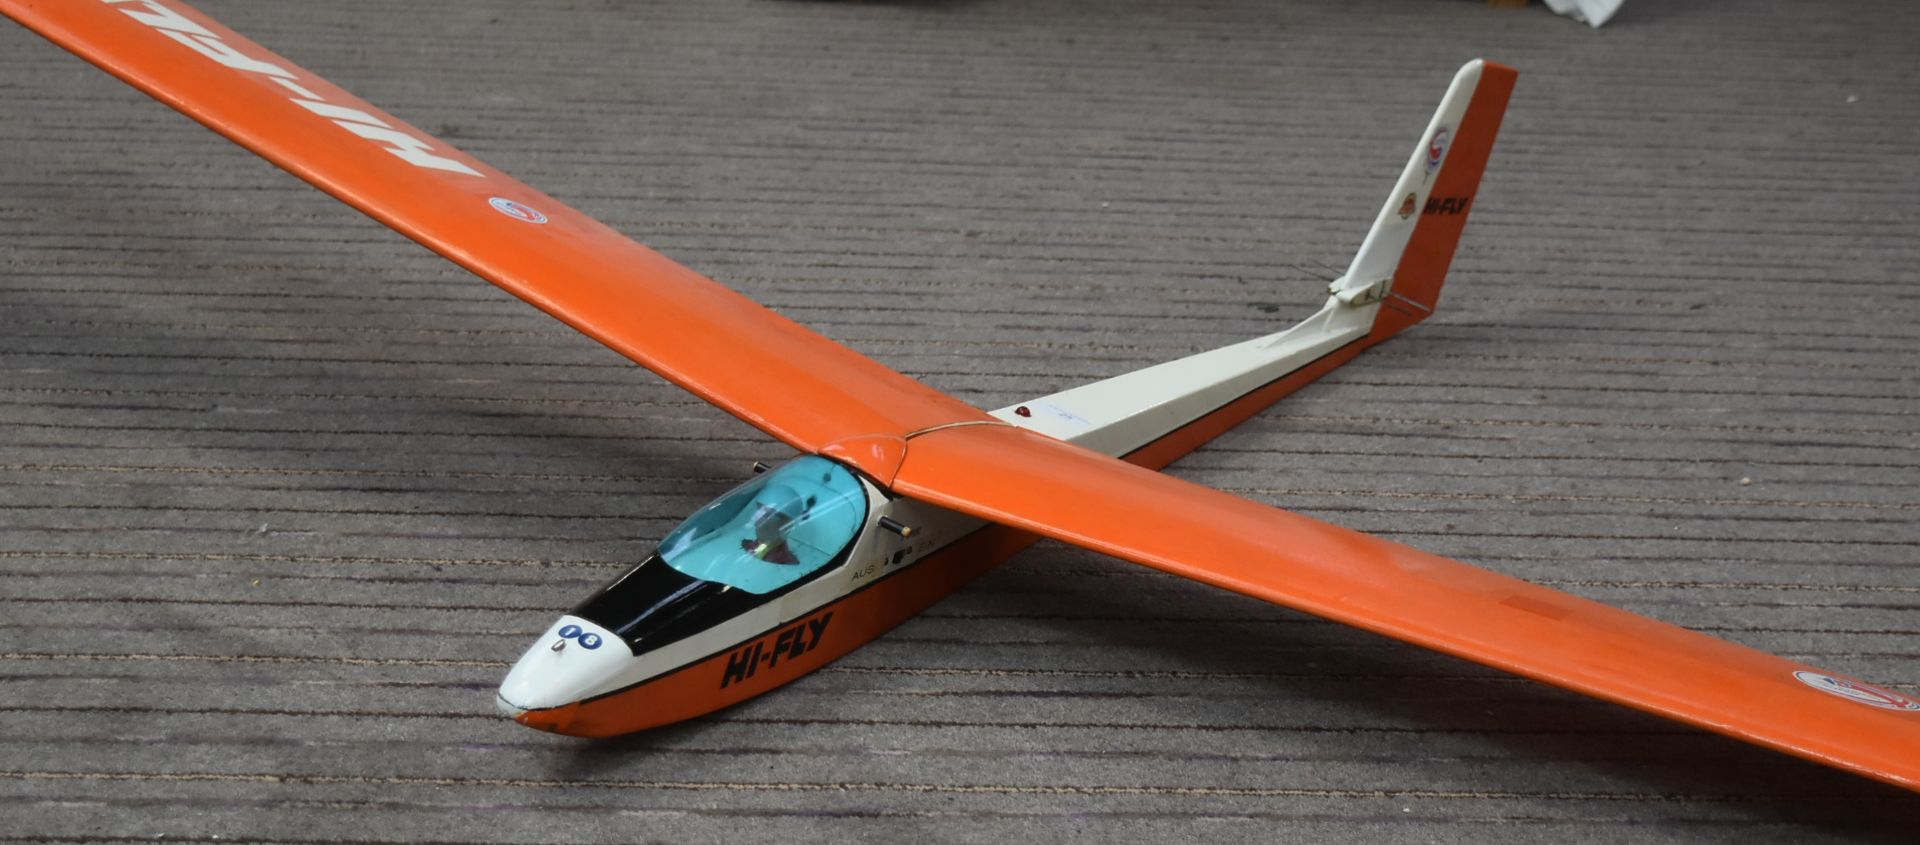 HI-FLY RC RADIO CONTROLLED MODEL GLIDER - Image 2 of 4